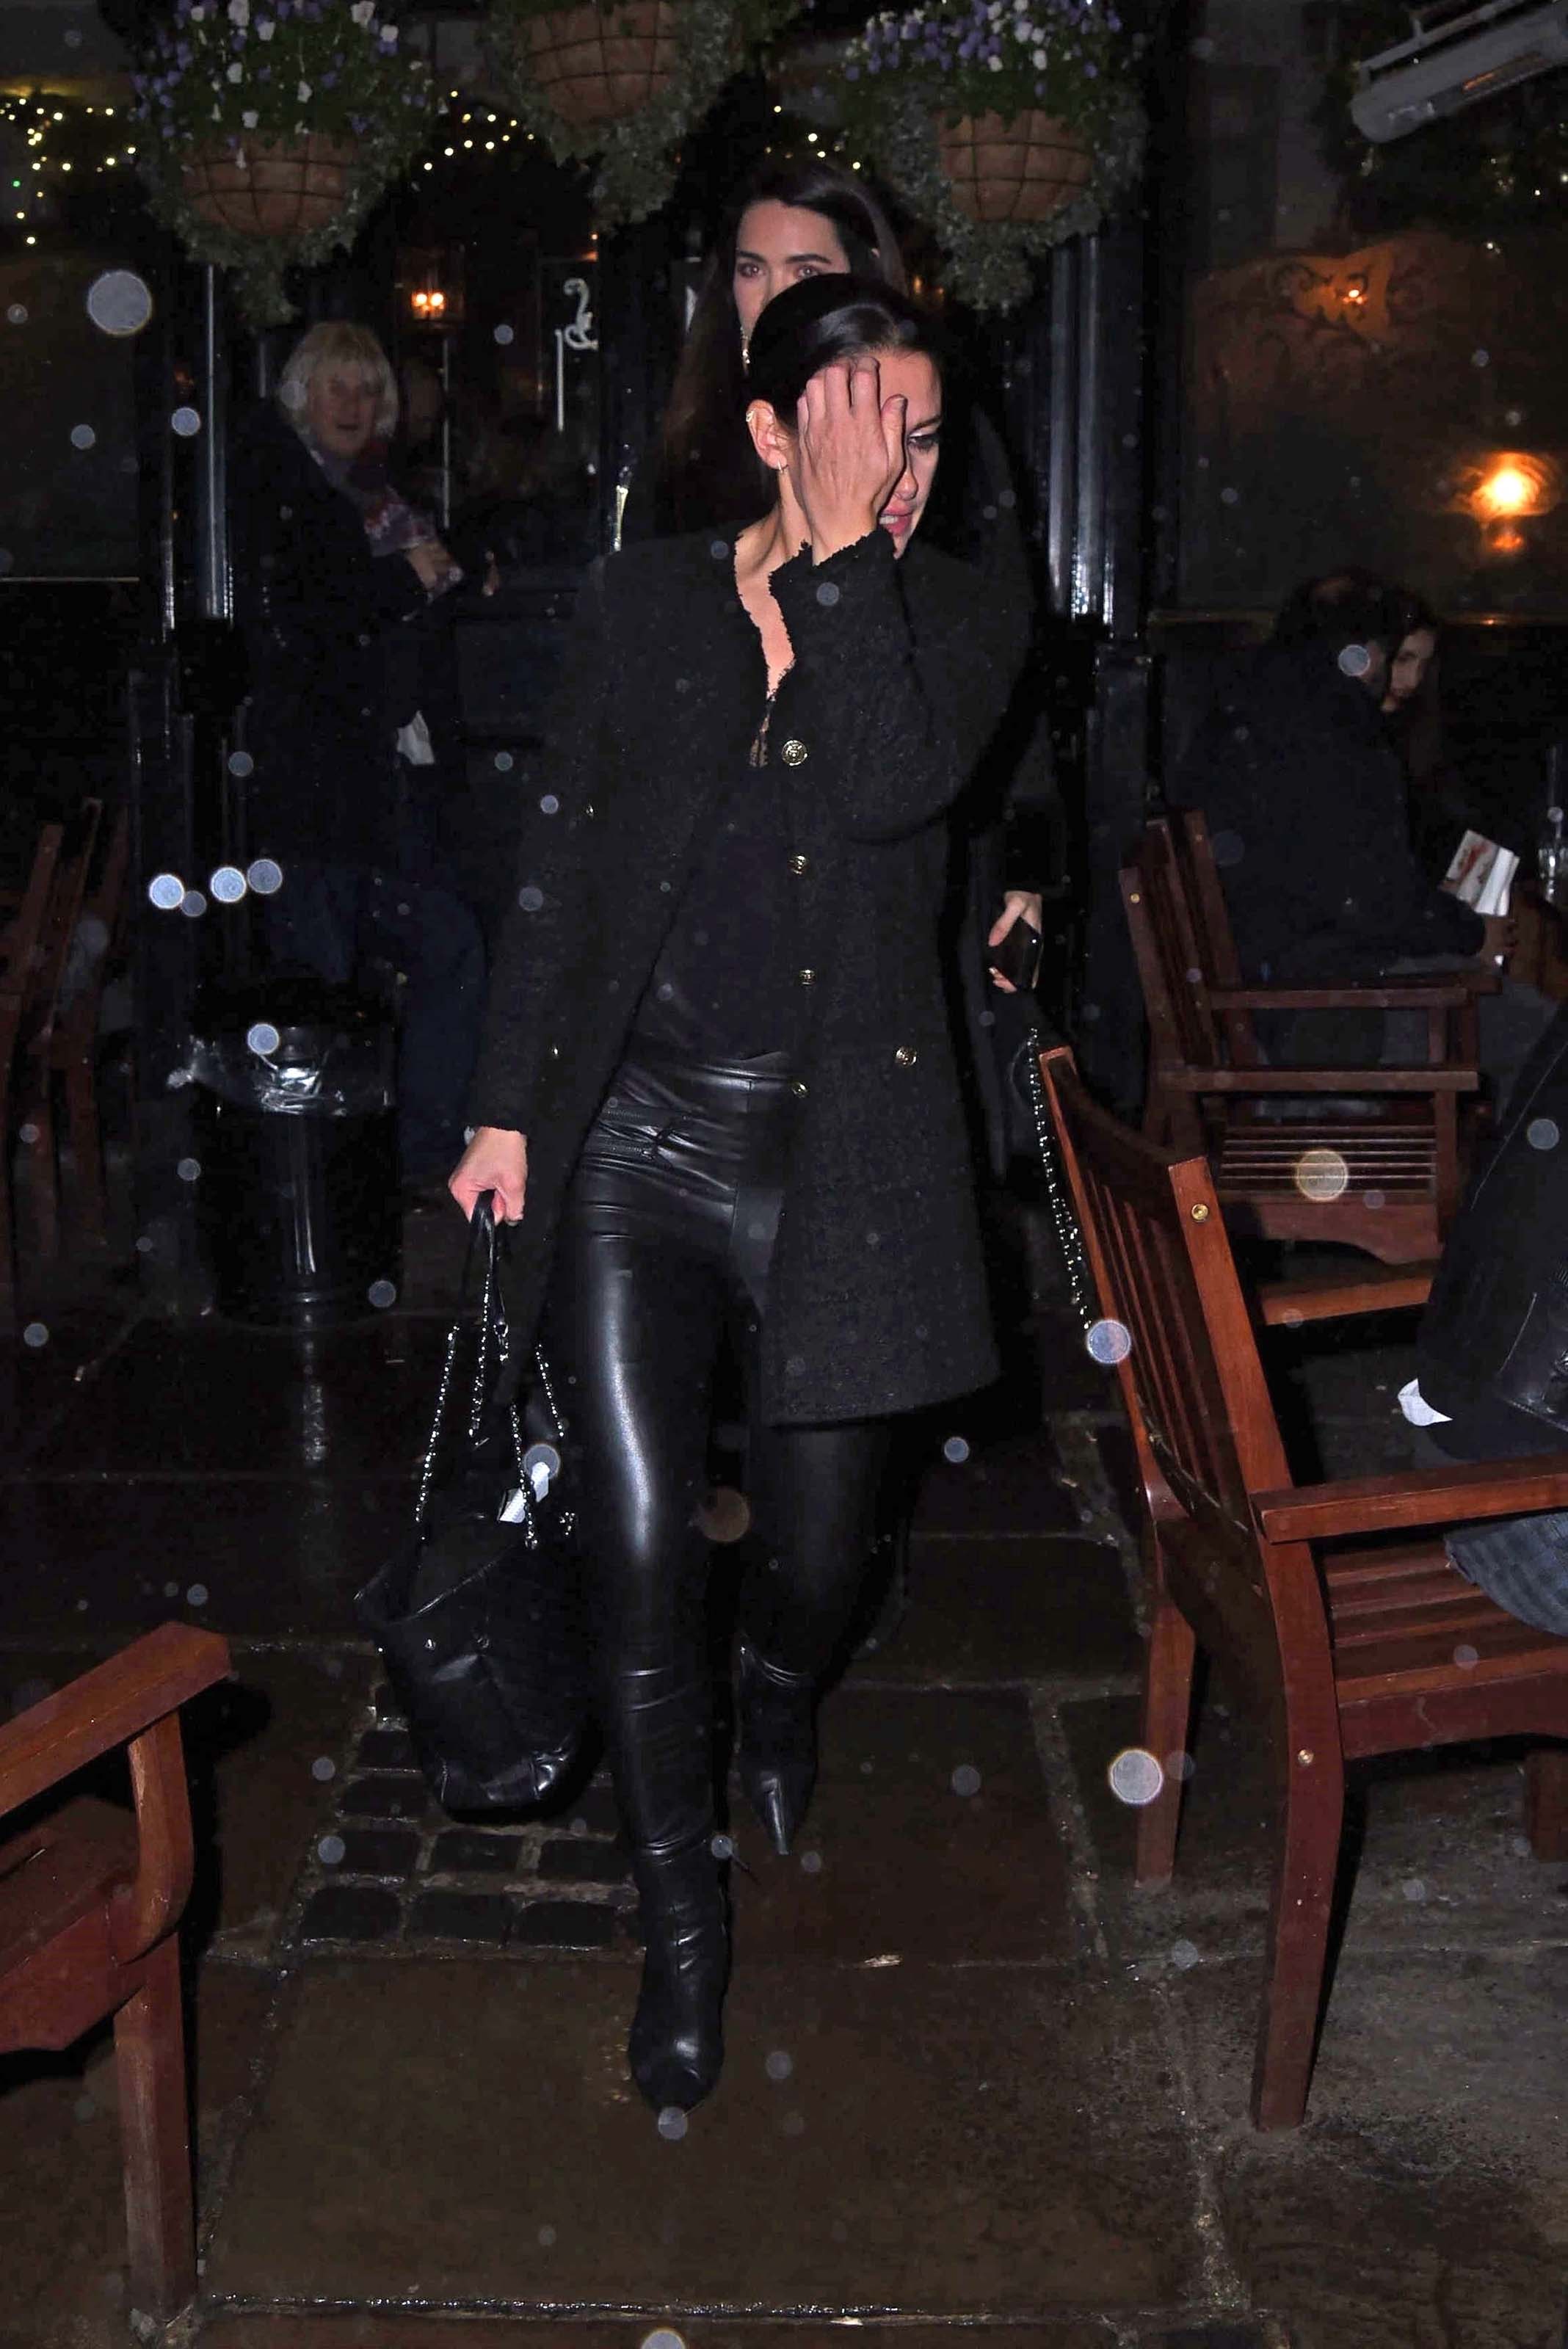 Kirsty Gallacher attends Piers Morgan’s Christmas Party